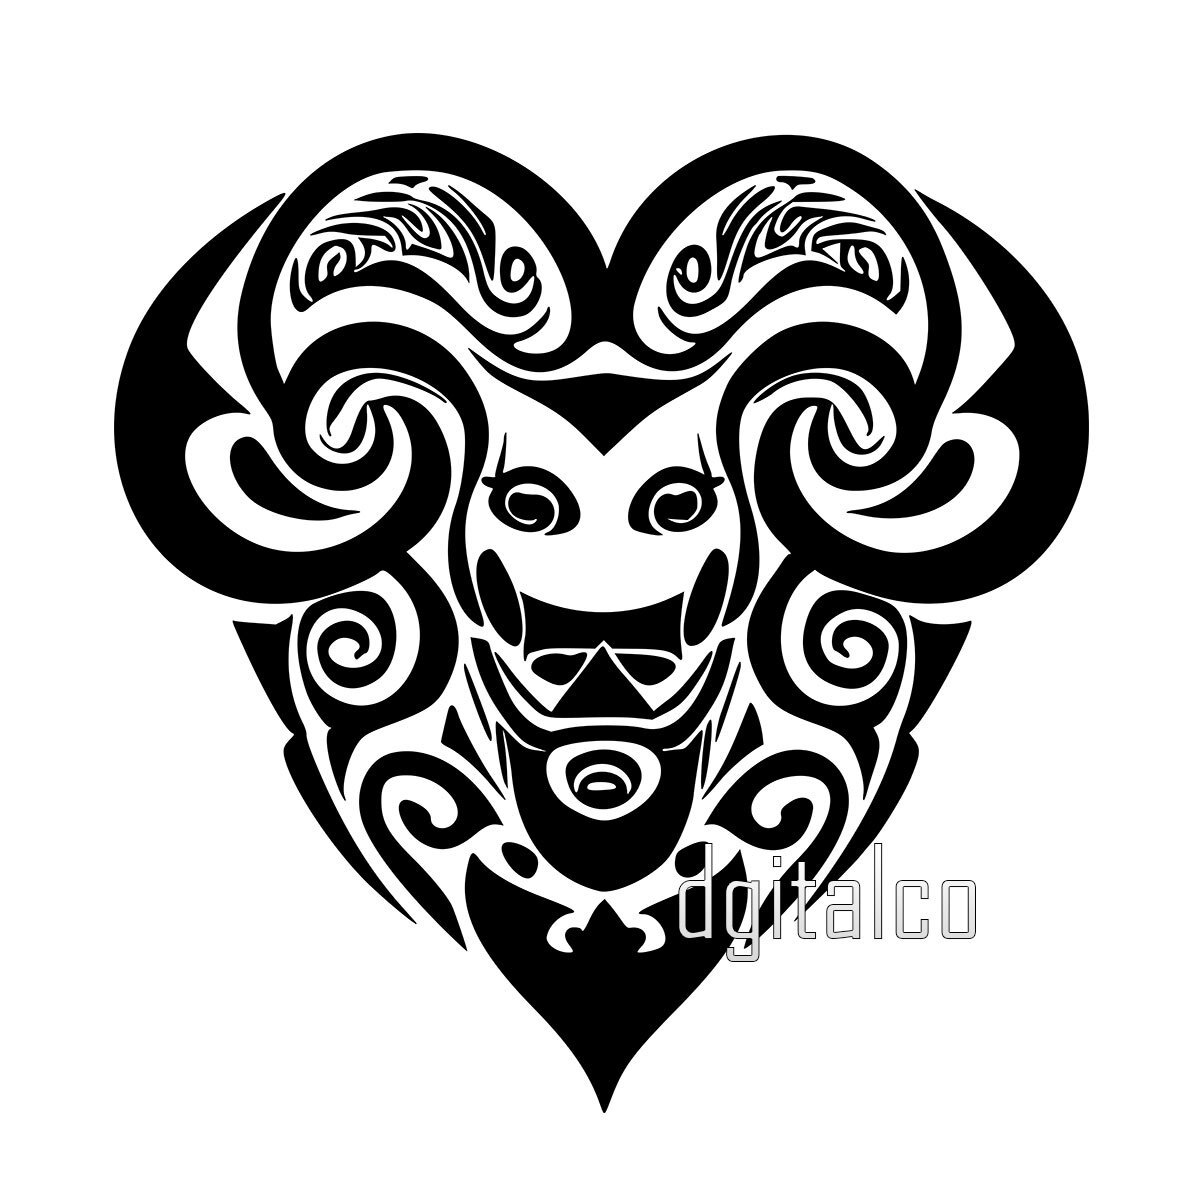 Captivating Aries zodiac tattoo designs & their profound meanings